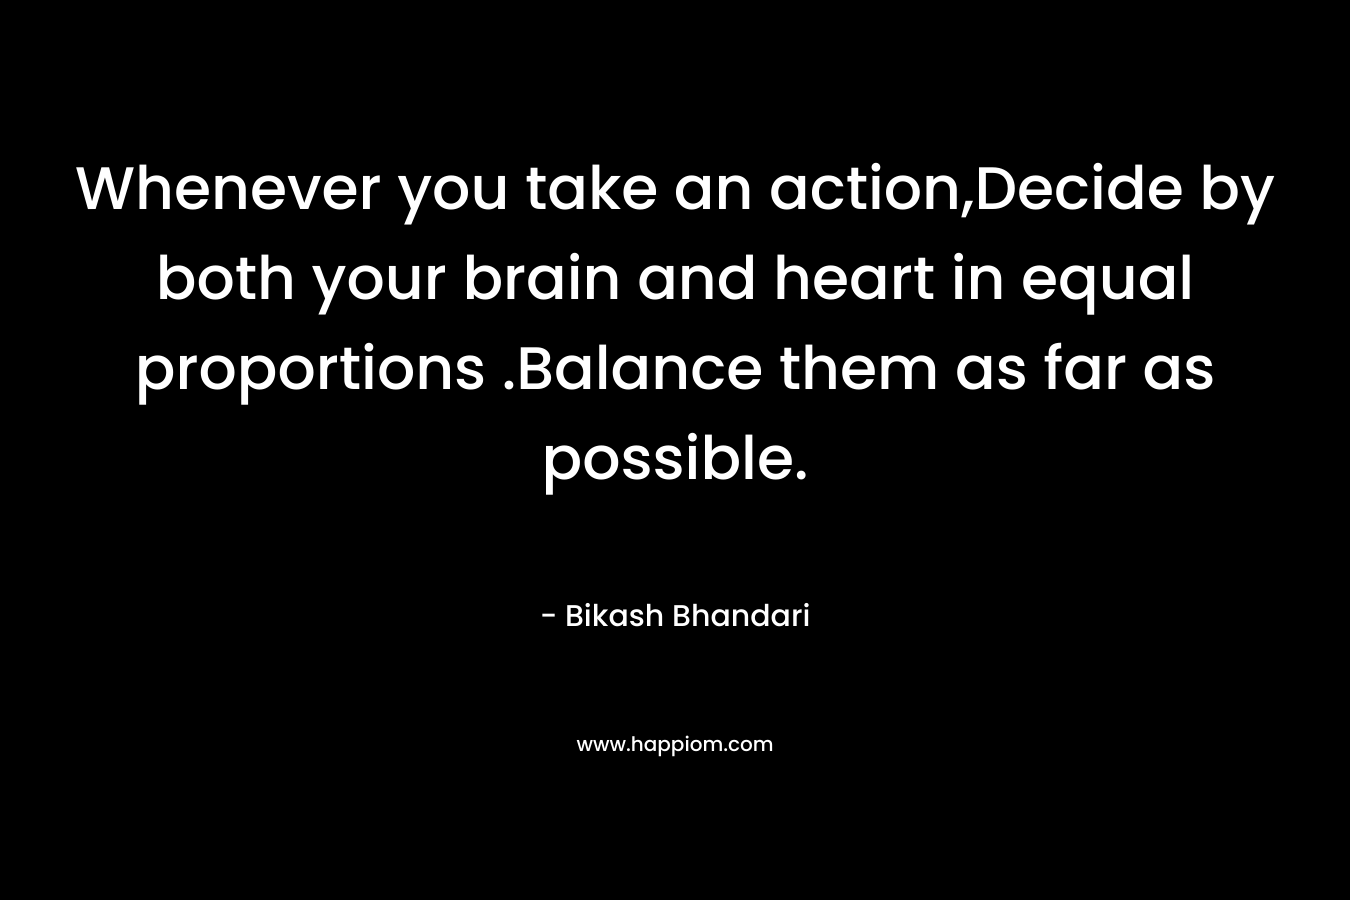 Whenever you take an action,Decide by both your brain and heart in equal proportions .Balance them as far as possible. – Bikash Bhandari